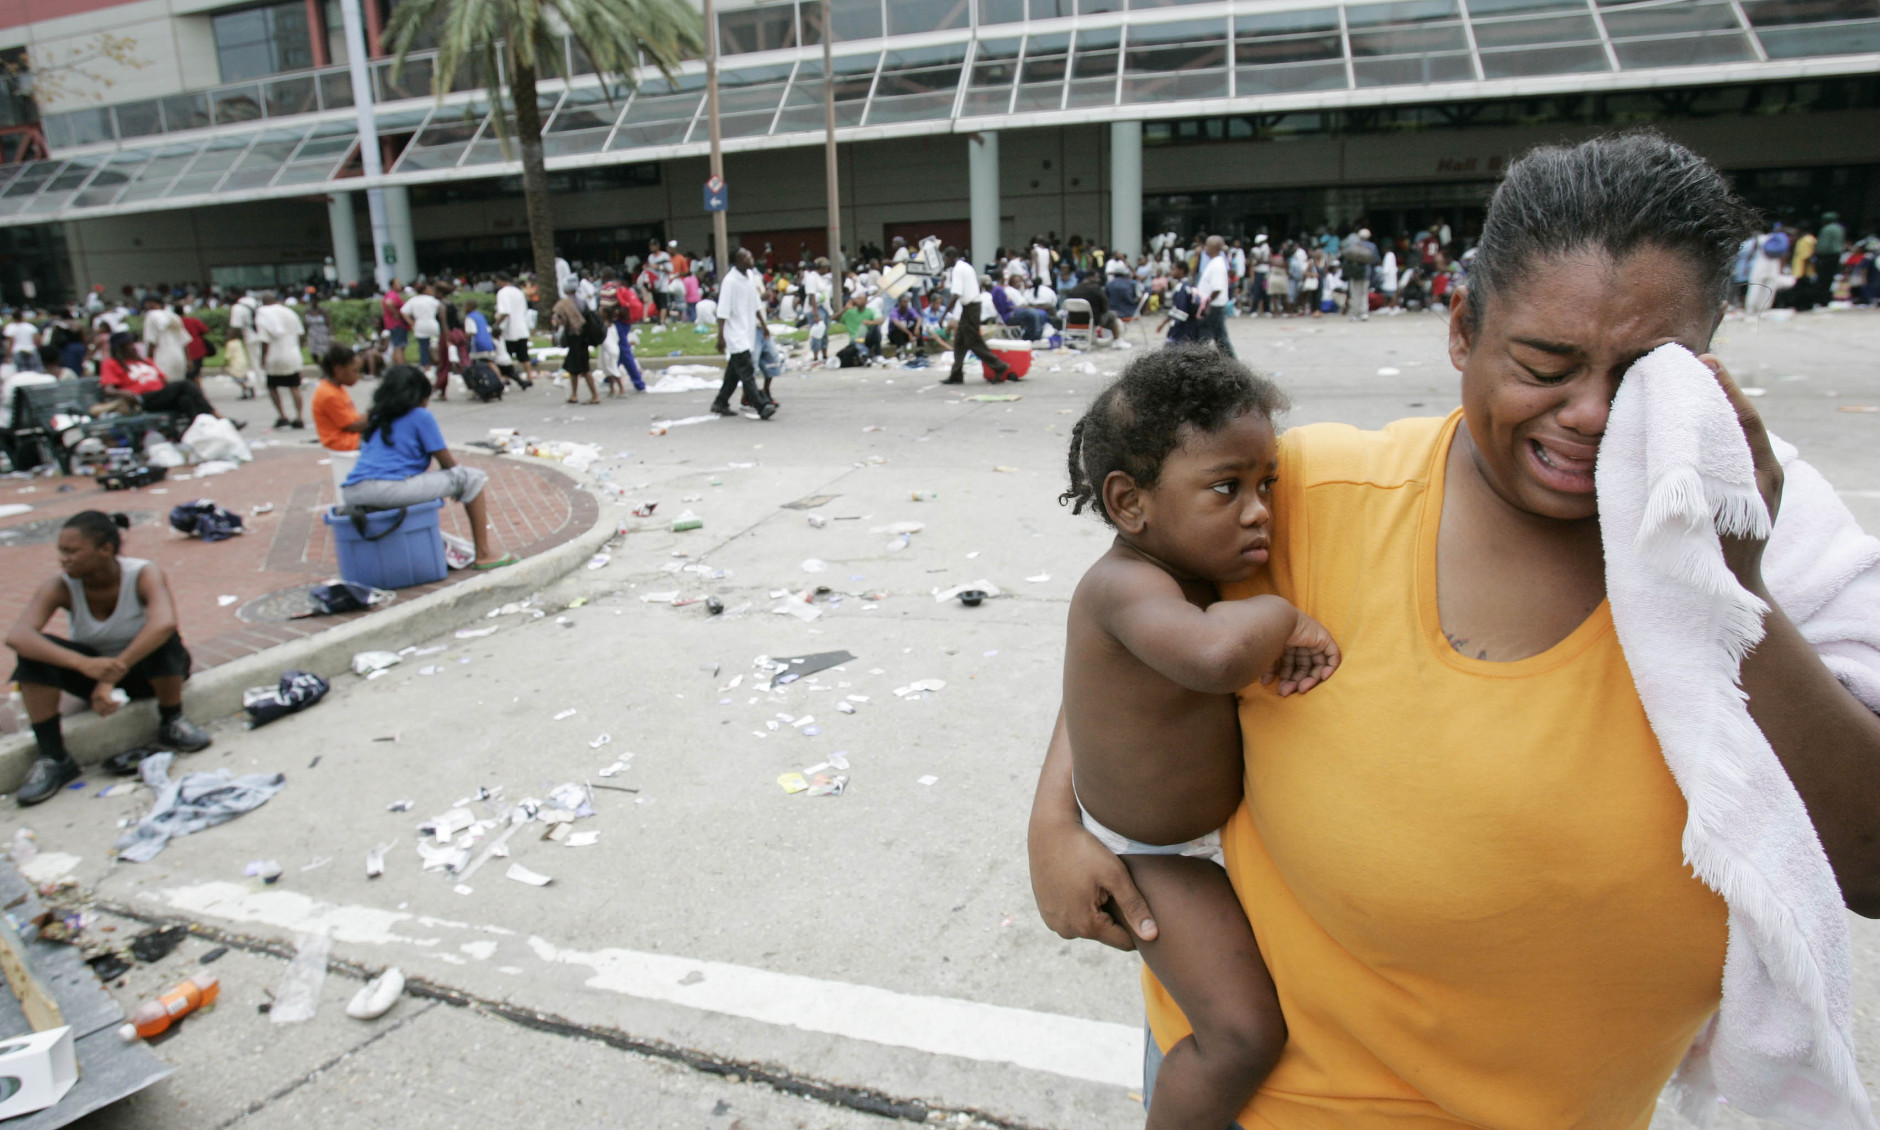 A woman cries as she waits with other flood victims at the Convention Center in New Orleans, Thursday, Sept. 1, 2005.  Officials called for a mandatory evacuation of the city, but many residents remained in the city and had to be rescued from flooded homes and hotels and remain in the city awaiting a way out.  (AP Photo/Eric Gay)